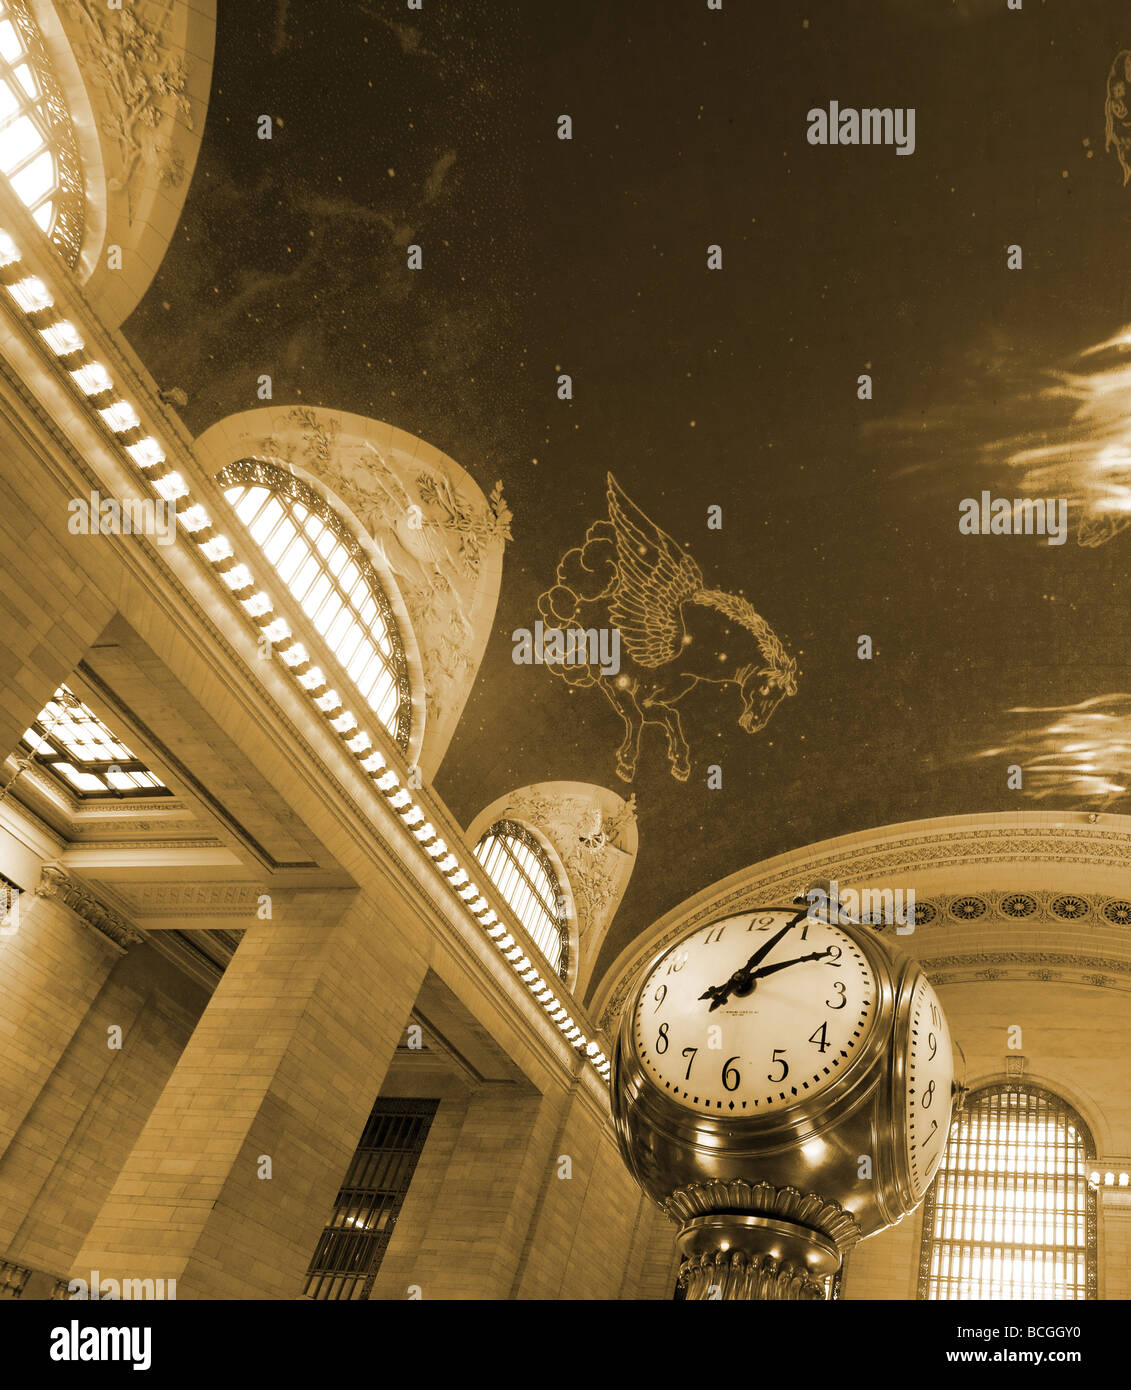 Grand Central Station Terminal in New York City Stockfoto